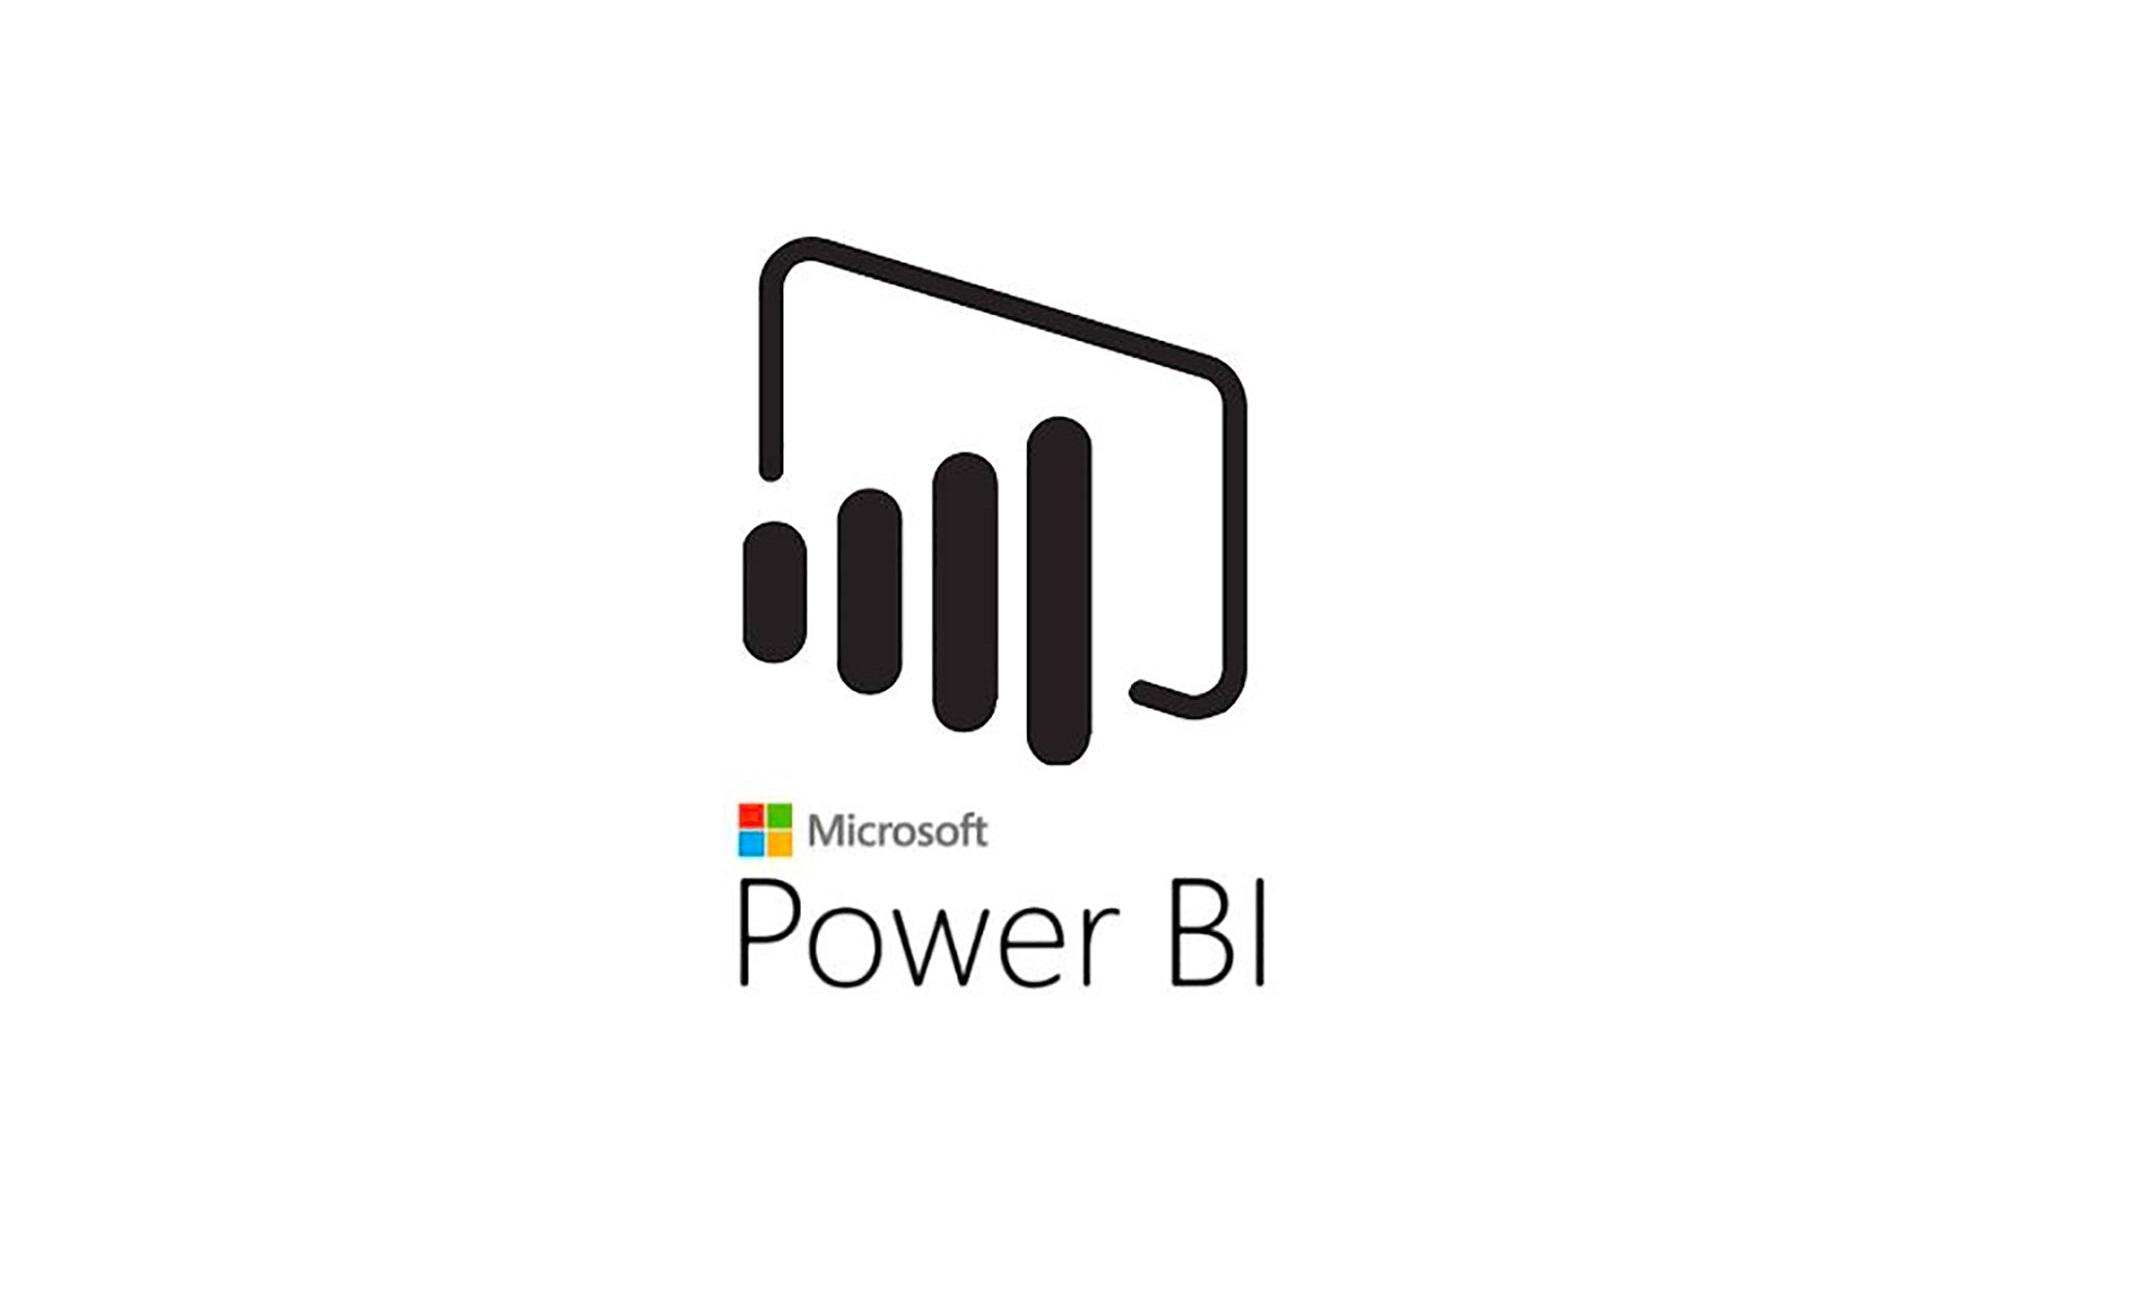 Microsoft Power BI Training in Evansville | Introduction to Power BI training for beginners | Getting started with Power BI | What is Power BI | January 20, 2020 - February 12, 2020